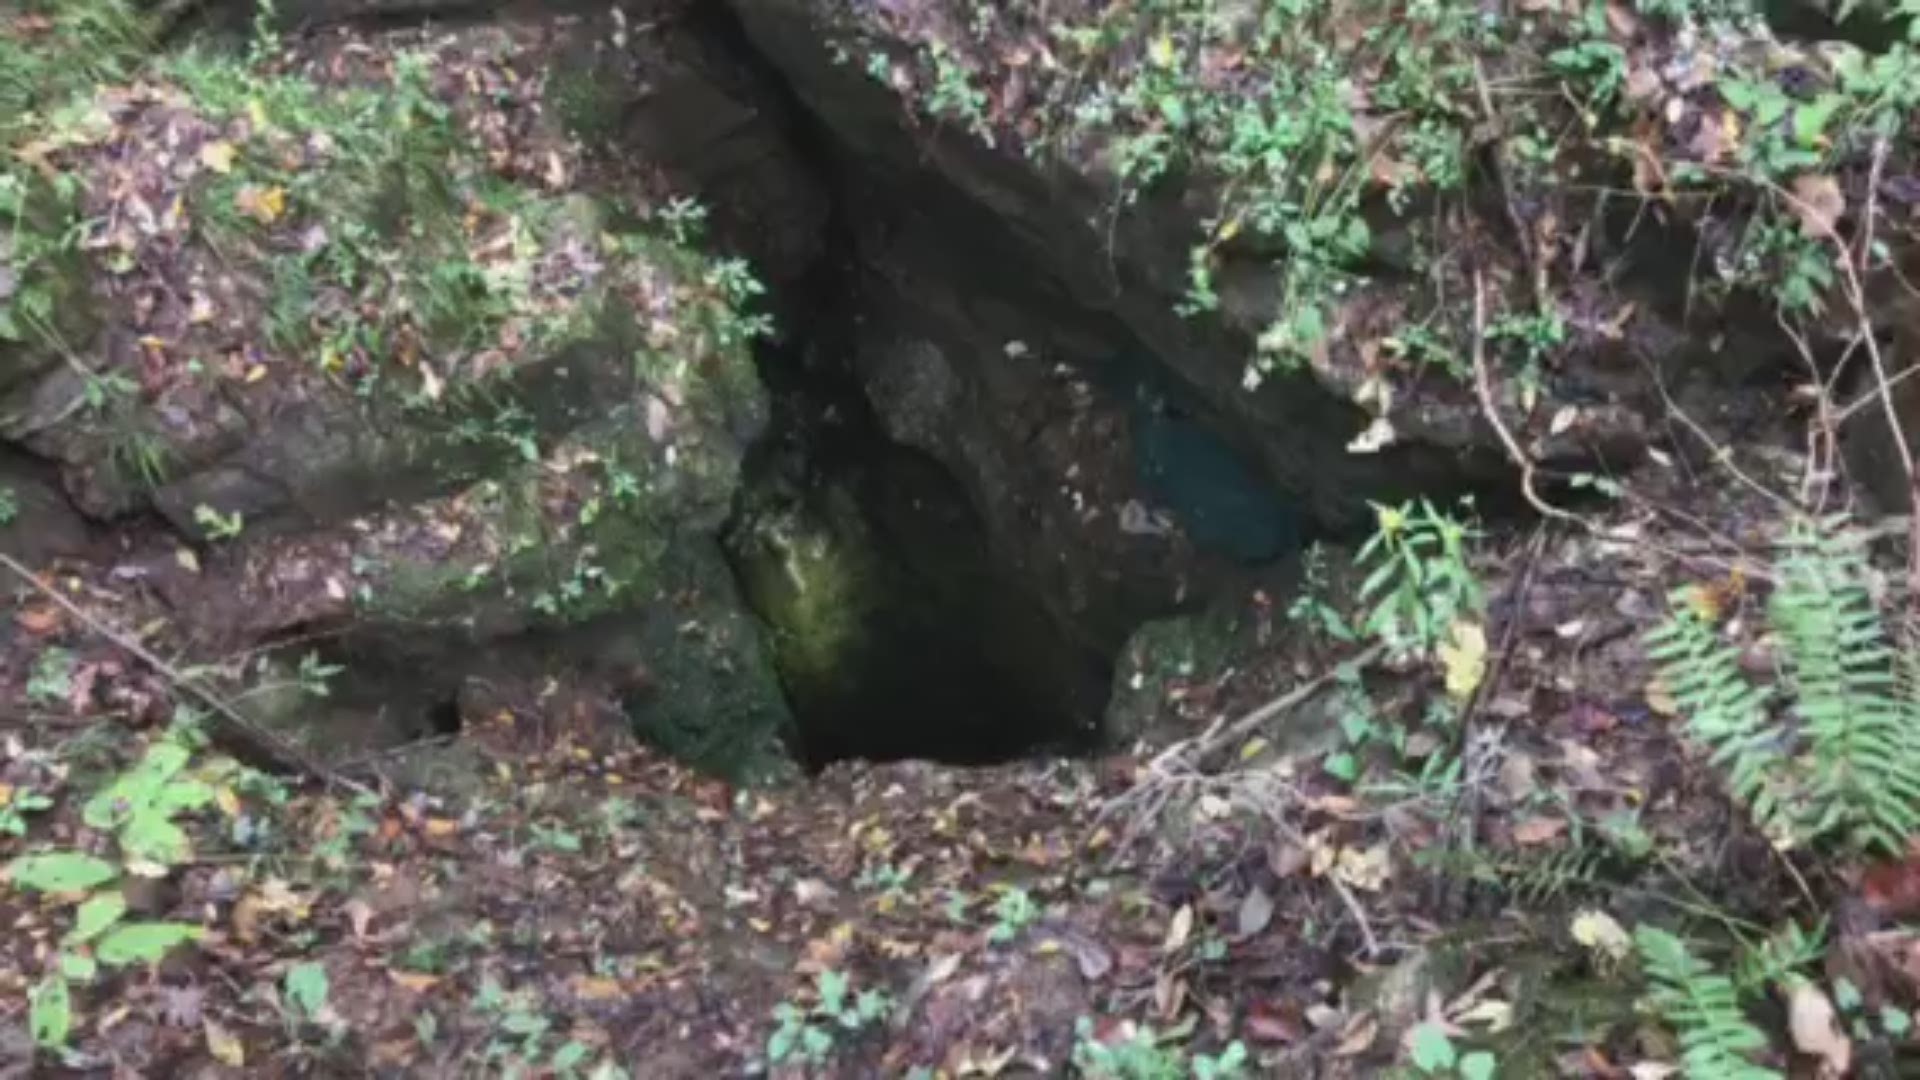 KVERS Cave/Vertical Team is responding at the request of Union County Sheriffs Office to two dogs in a deep sinkhole.